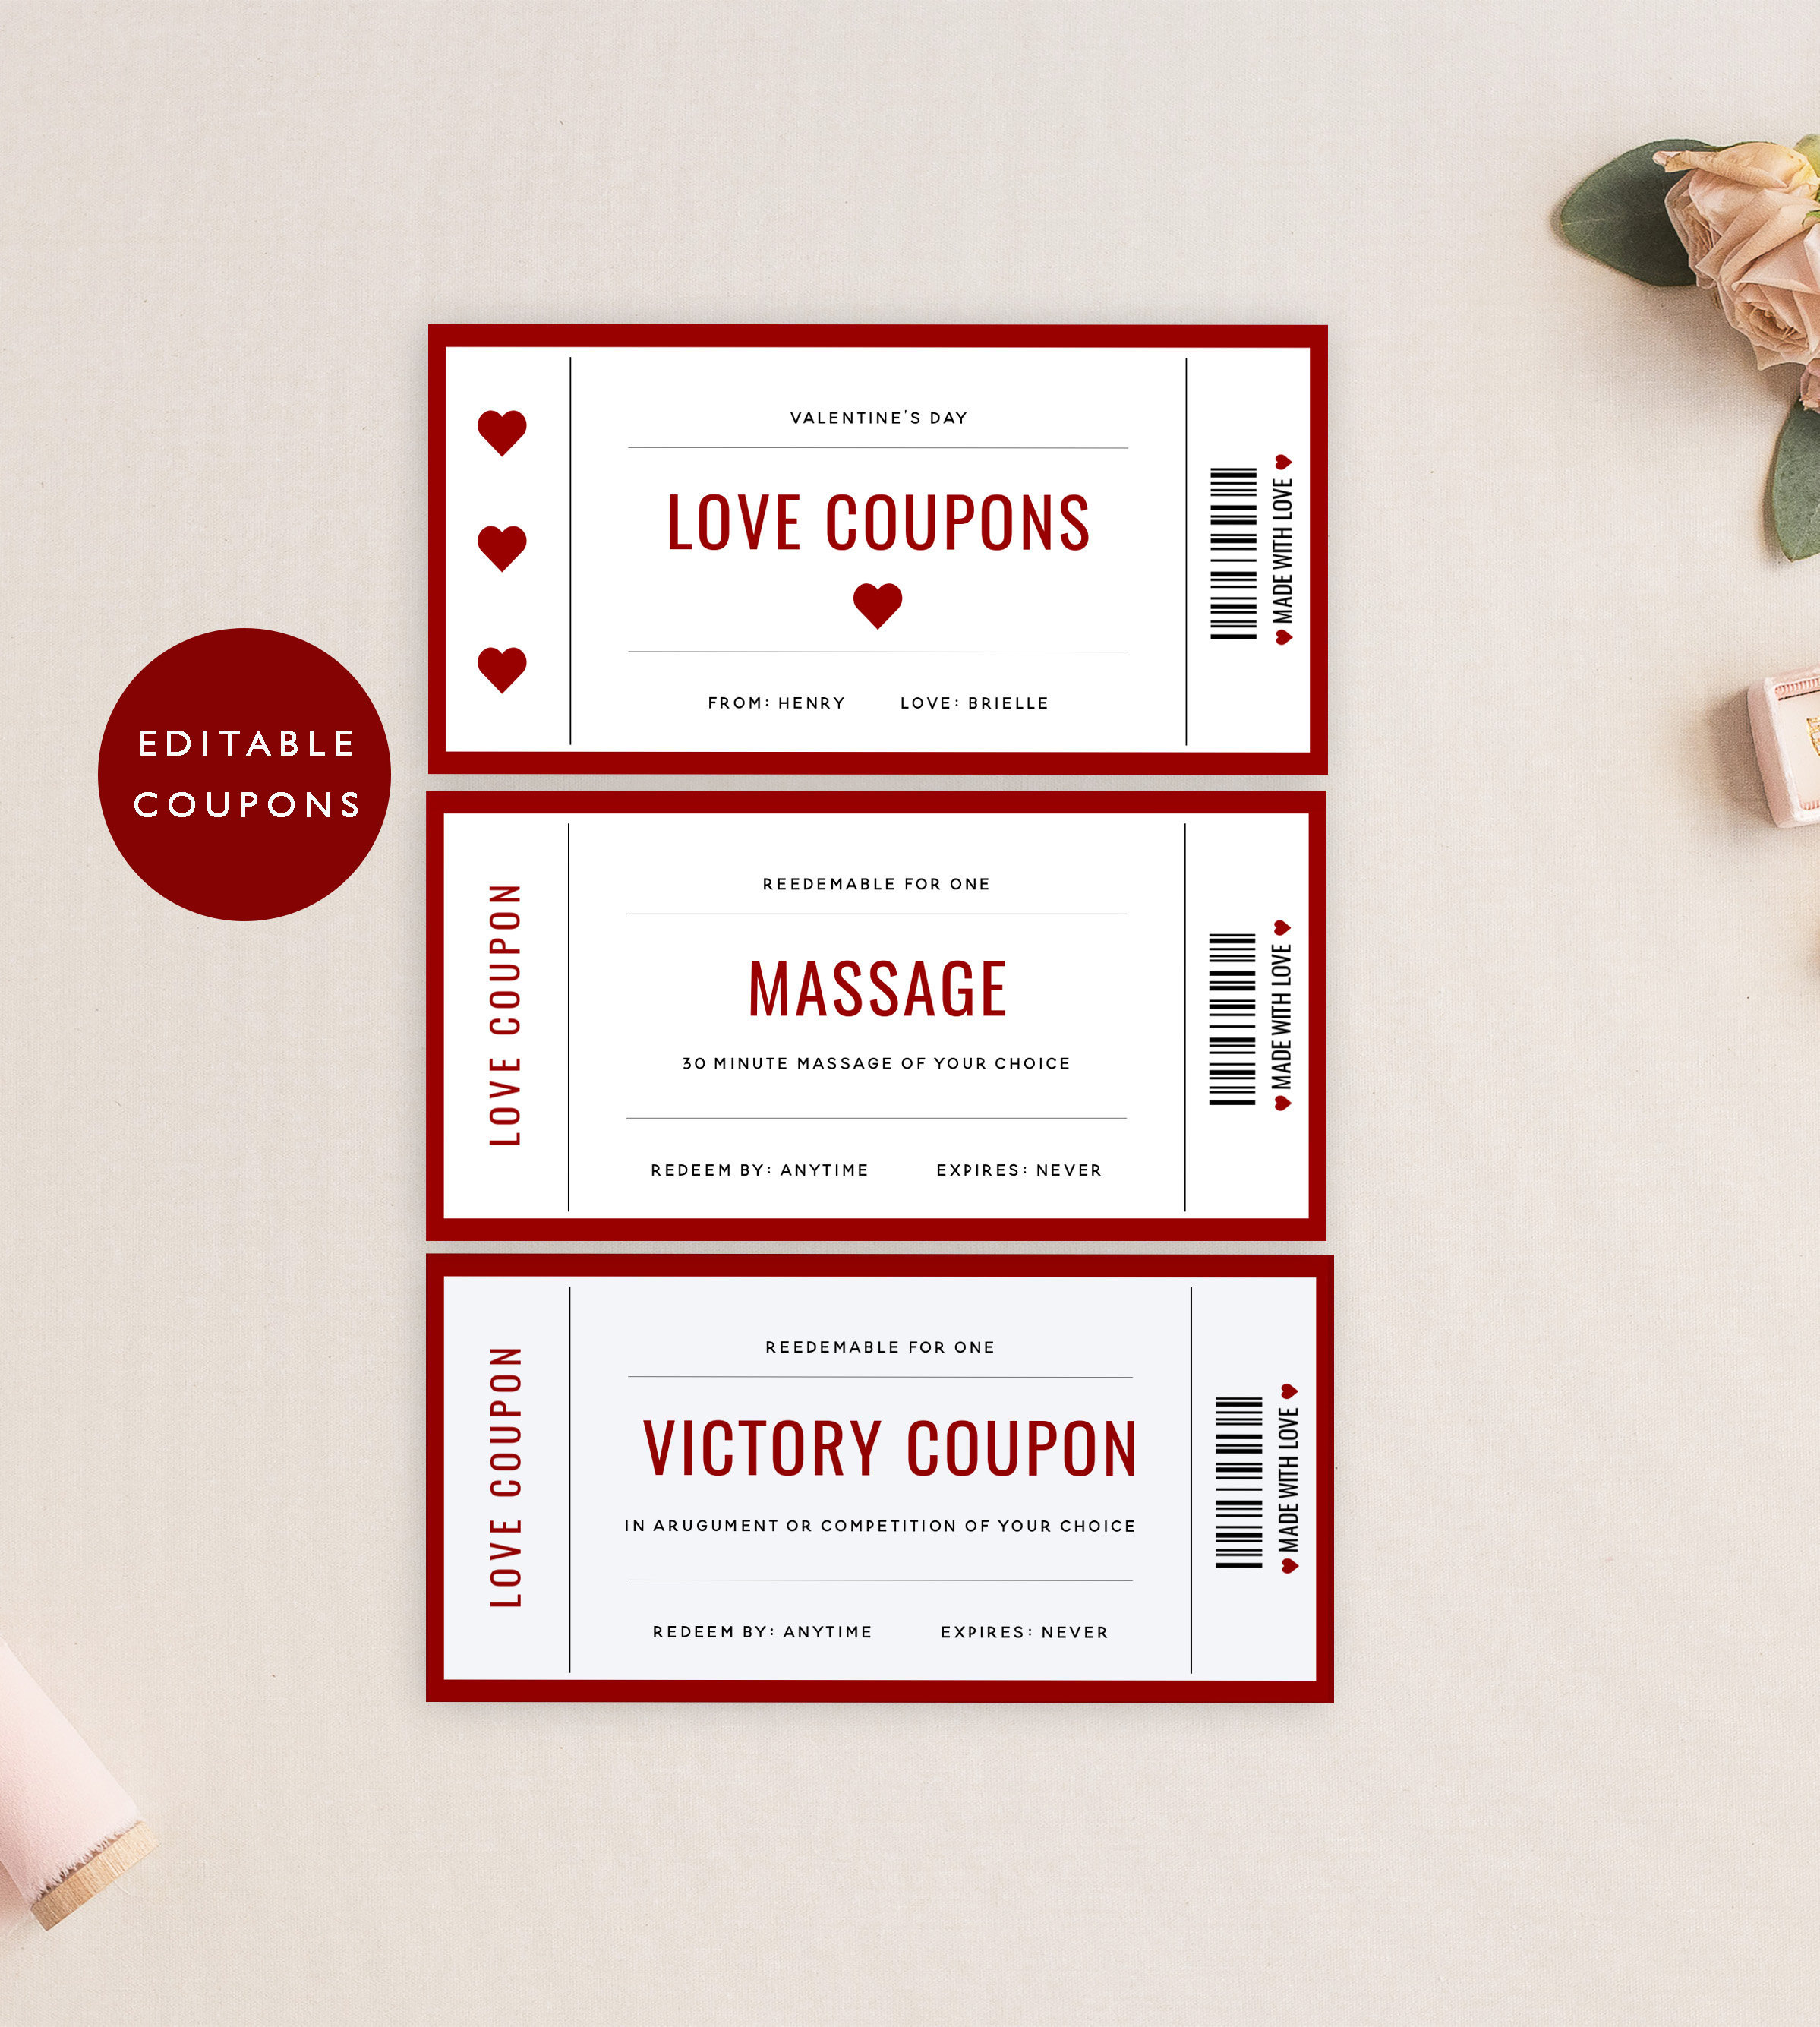 15 IOU Love Voucher Coupons For Him Or Her, Husband Wife Boyfriend Or Girlfriend Couples Valentines Day, Unique Birthday, Funny Anniversary, Romantic Christmas Gift, Naughty Sexy I Owe You Sex Cards 